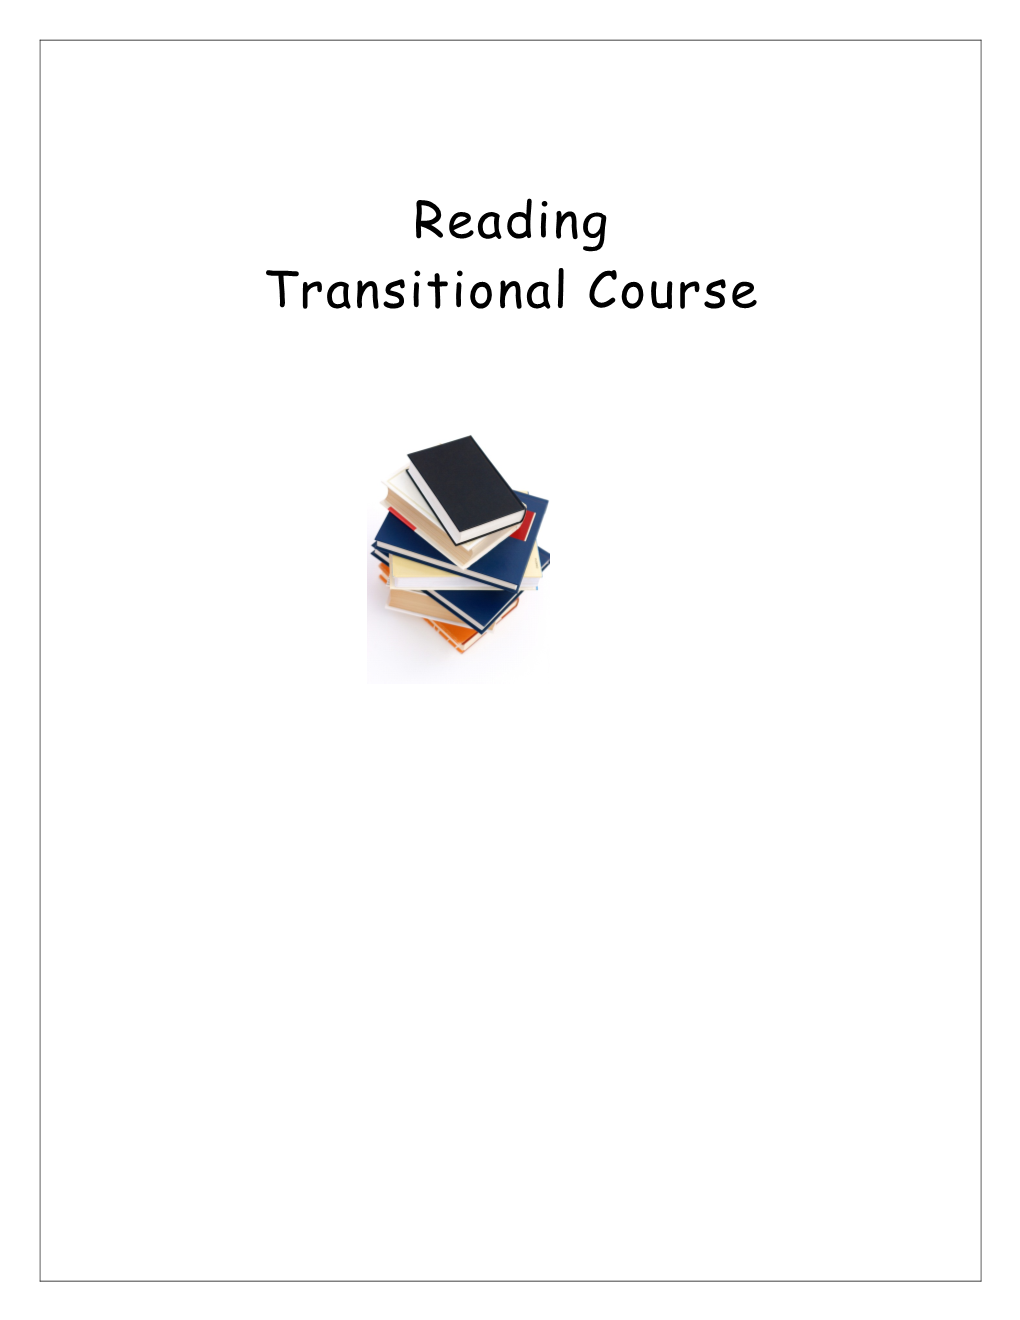 Introduction to Reading Transitional Course 3